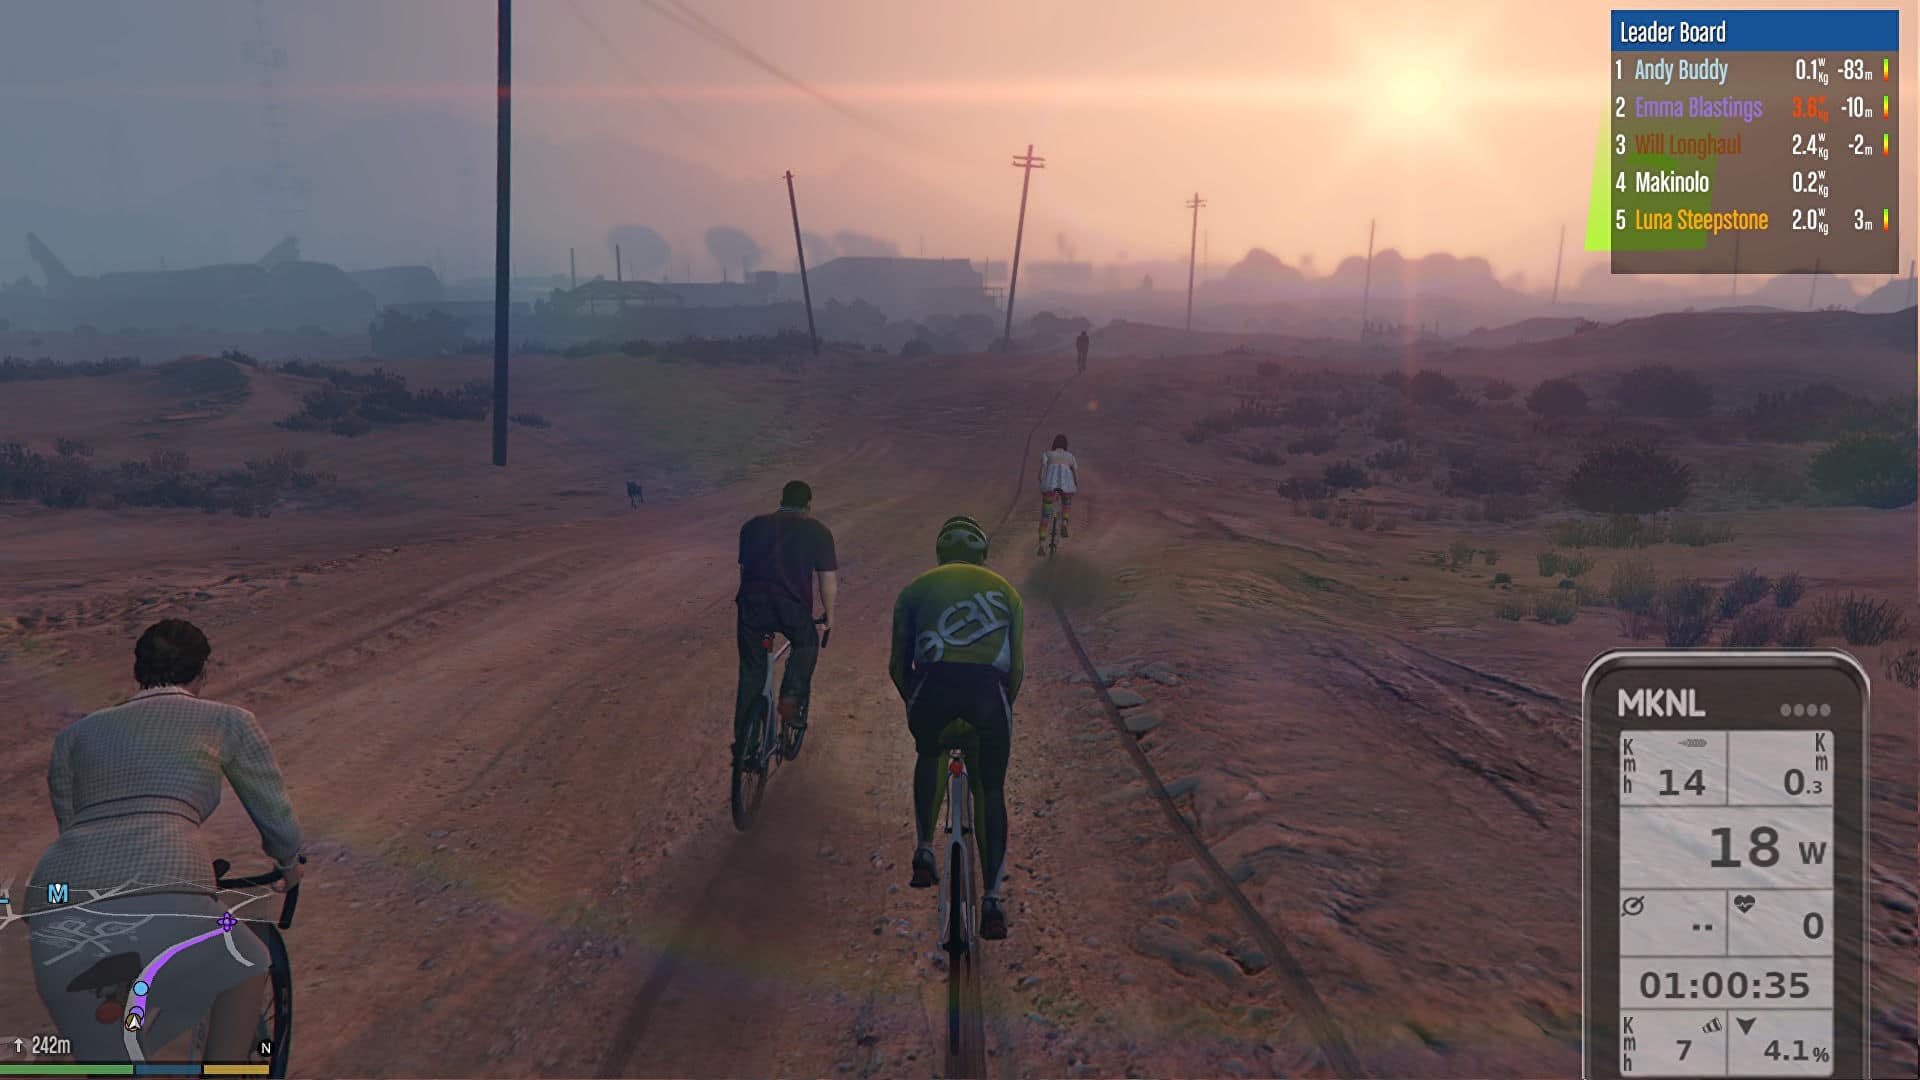 Move over Zwift, it's time for Grand Theft Auto V